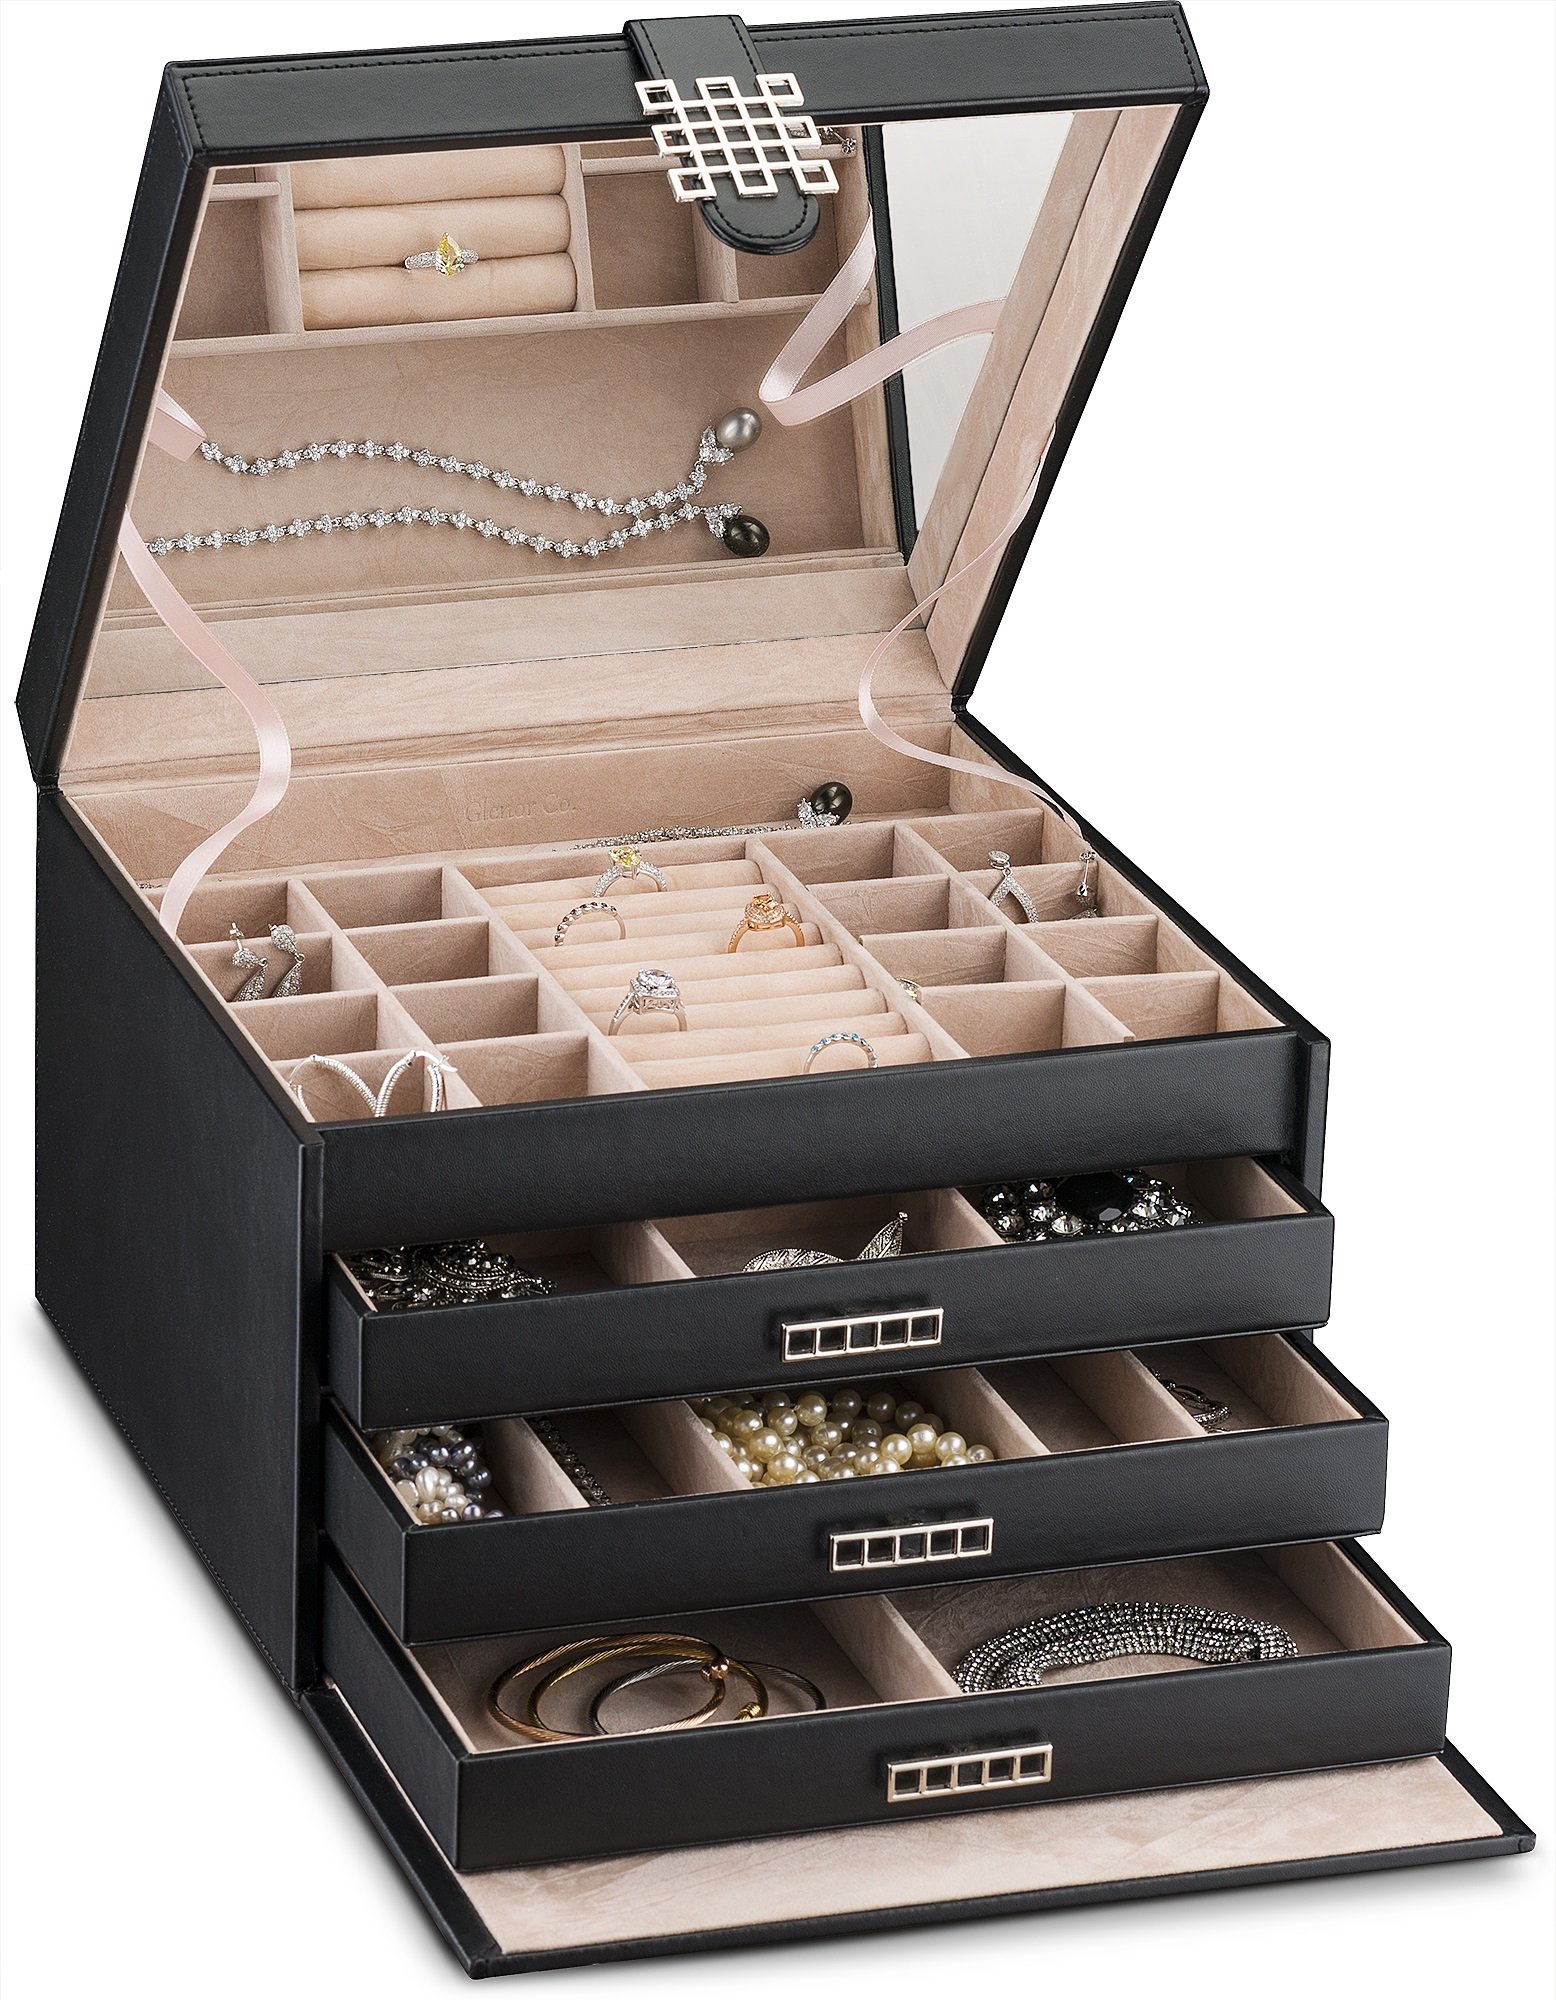 Glenor Co Extra Large Jewelry Box Organizer - 42 Slot Classic Holder w Modern Closure, Drawer, Big Mirror & 4 Trays for Women - Storage Case for Earring Ring Necklace Bracelet Watch -PU Leather- Black